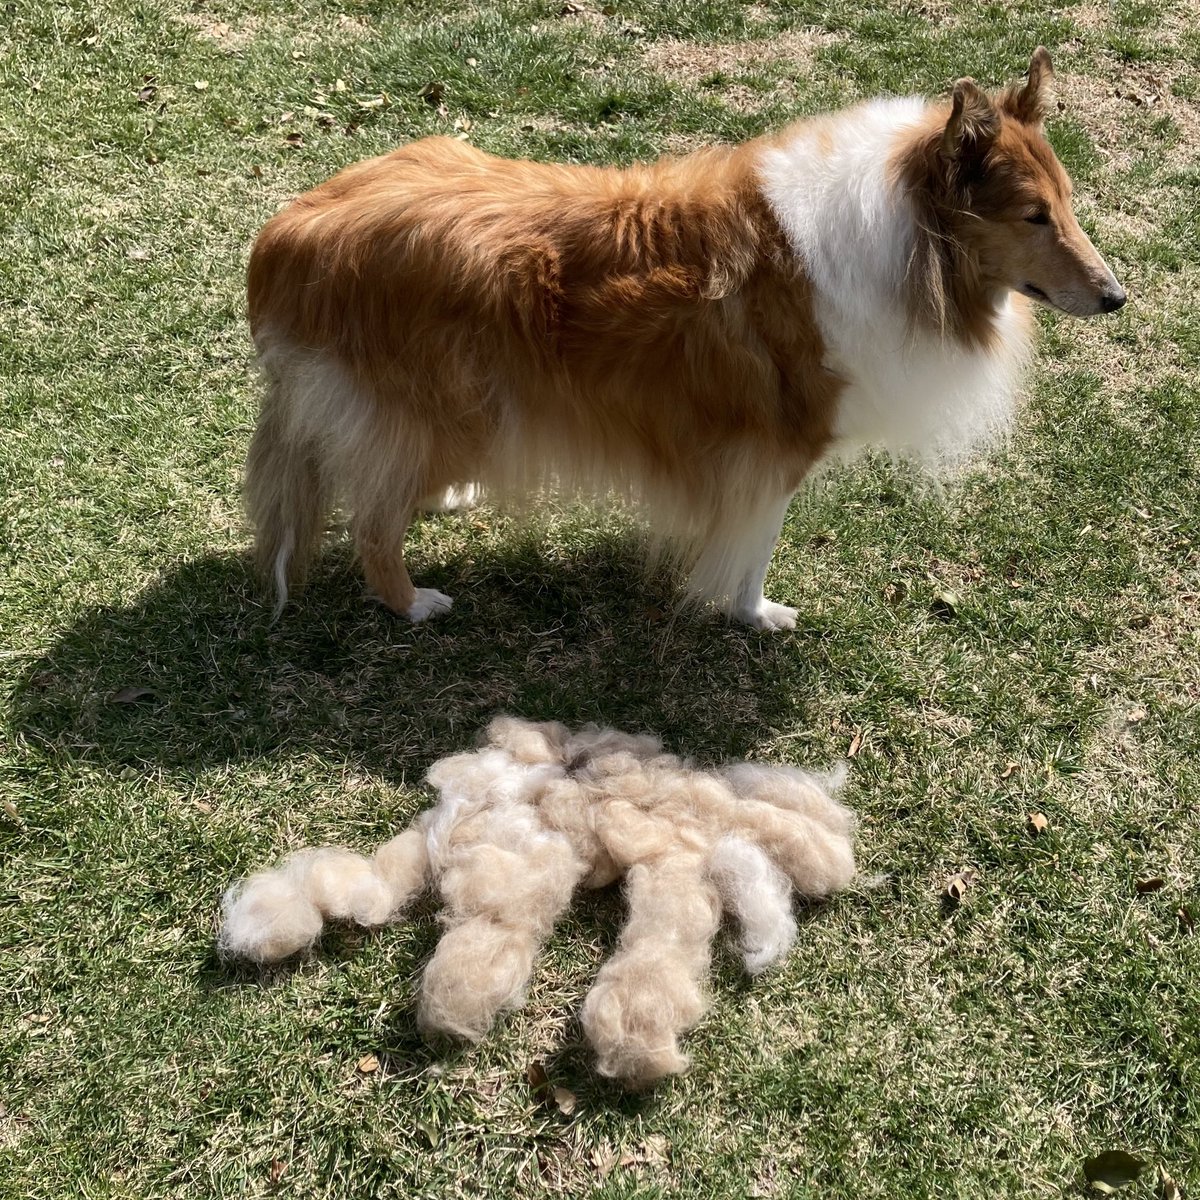 🐑 Baa, we heard it was lambing season and it seems I’ve created a mini-me that looks like a lamb 🐑 from the recent brushing of my shedding hair! 
#meandminime 

#roughcollie #collie #doghairgonewild #doghair